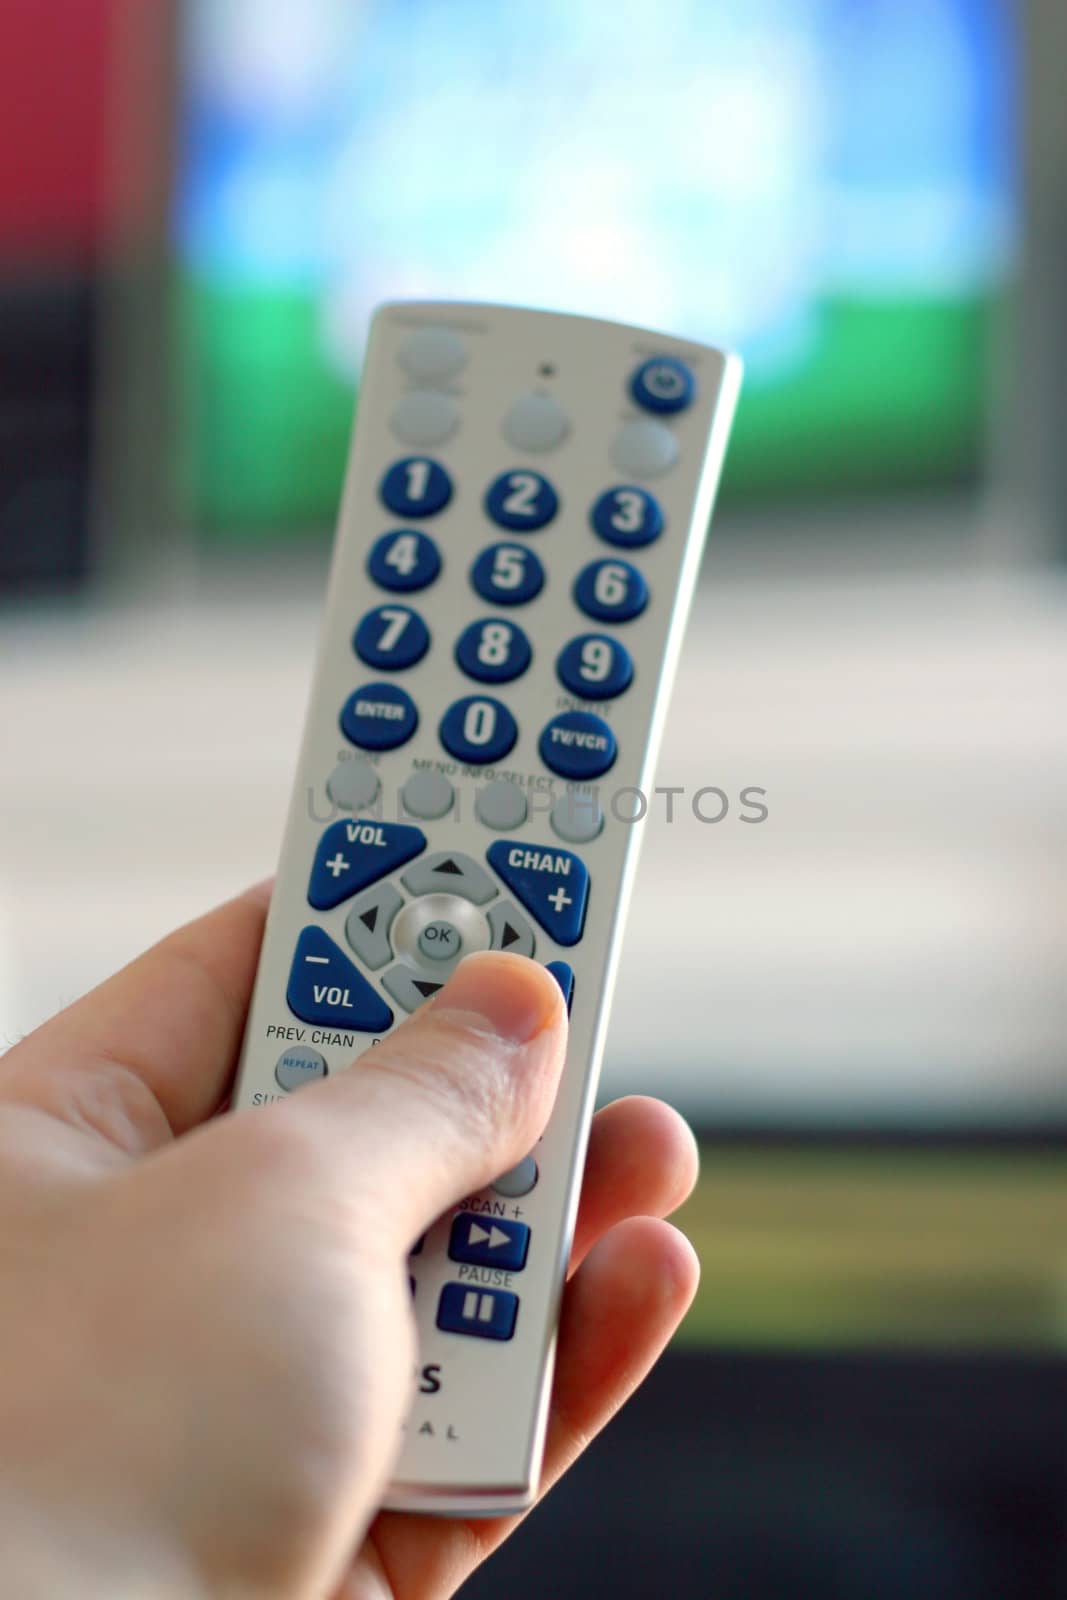 A remote control in action - shallow depth of field, with focus on the remote.